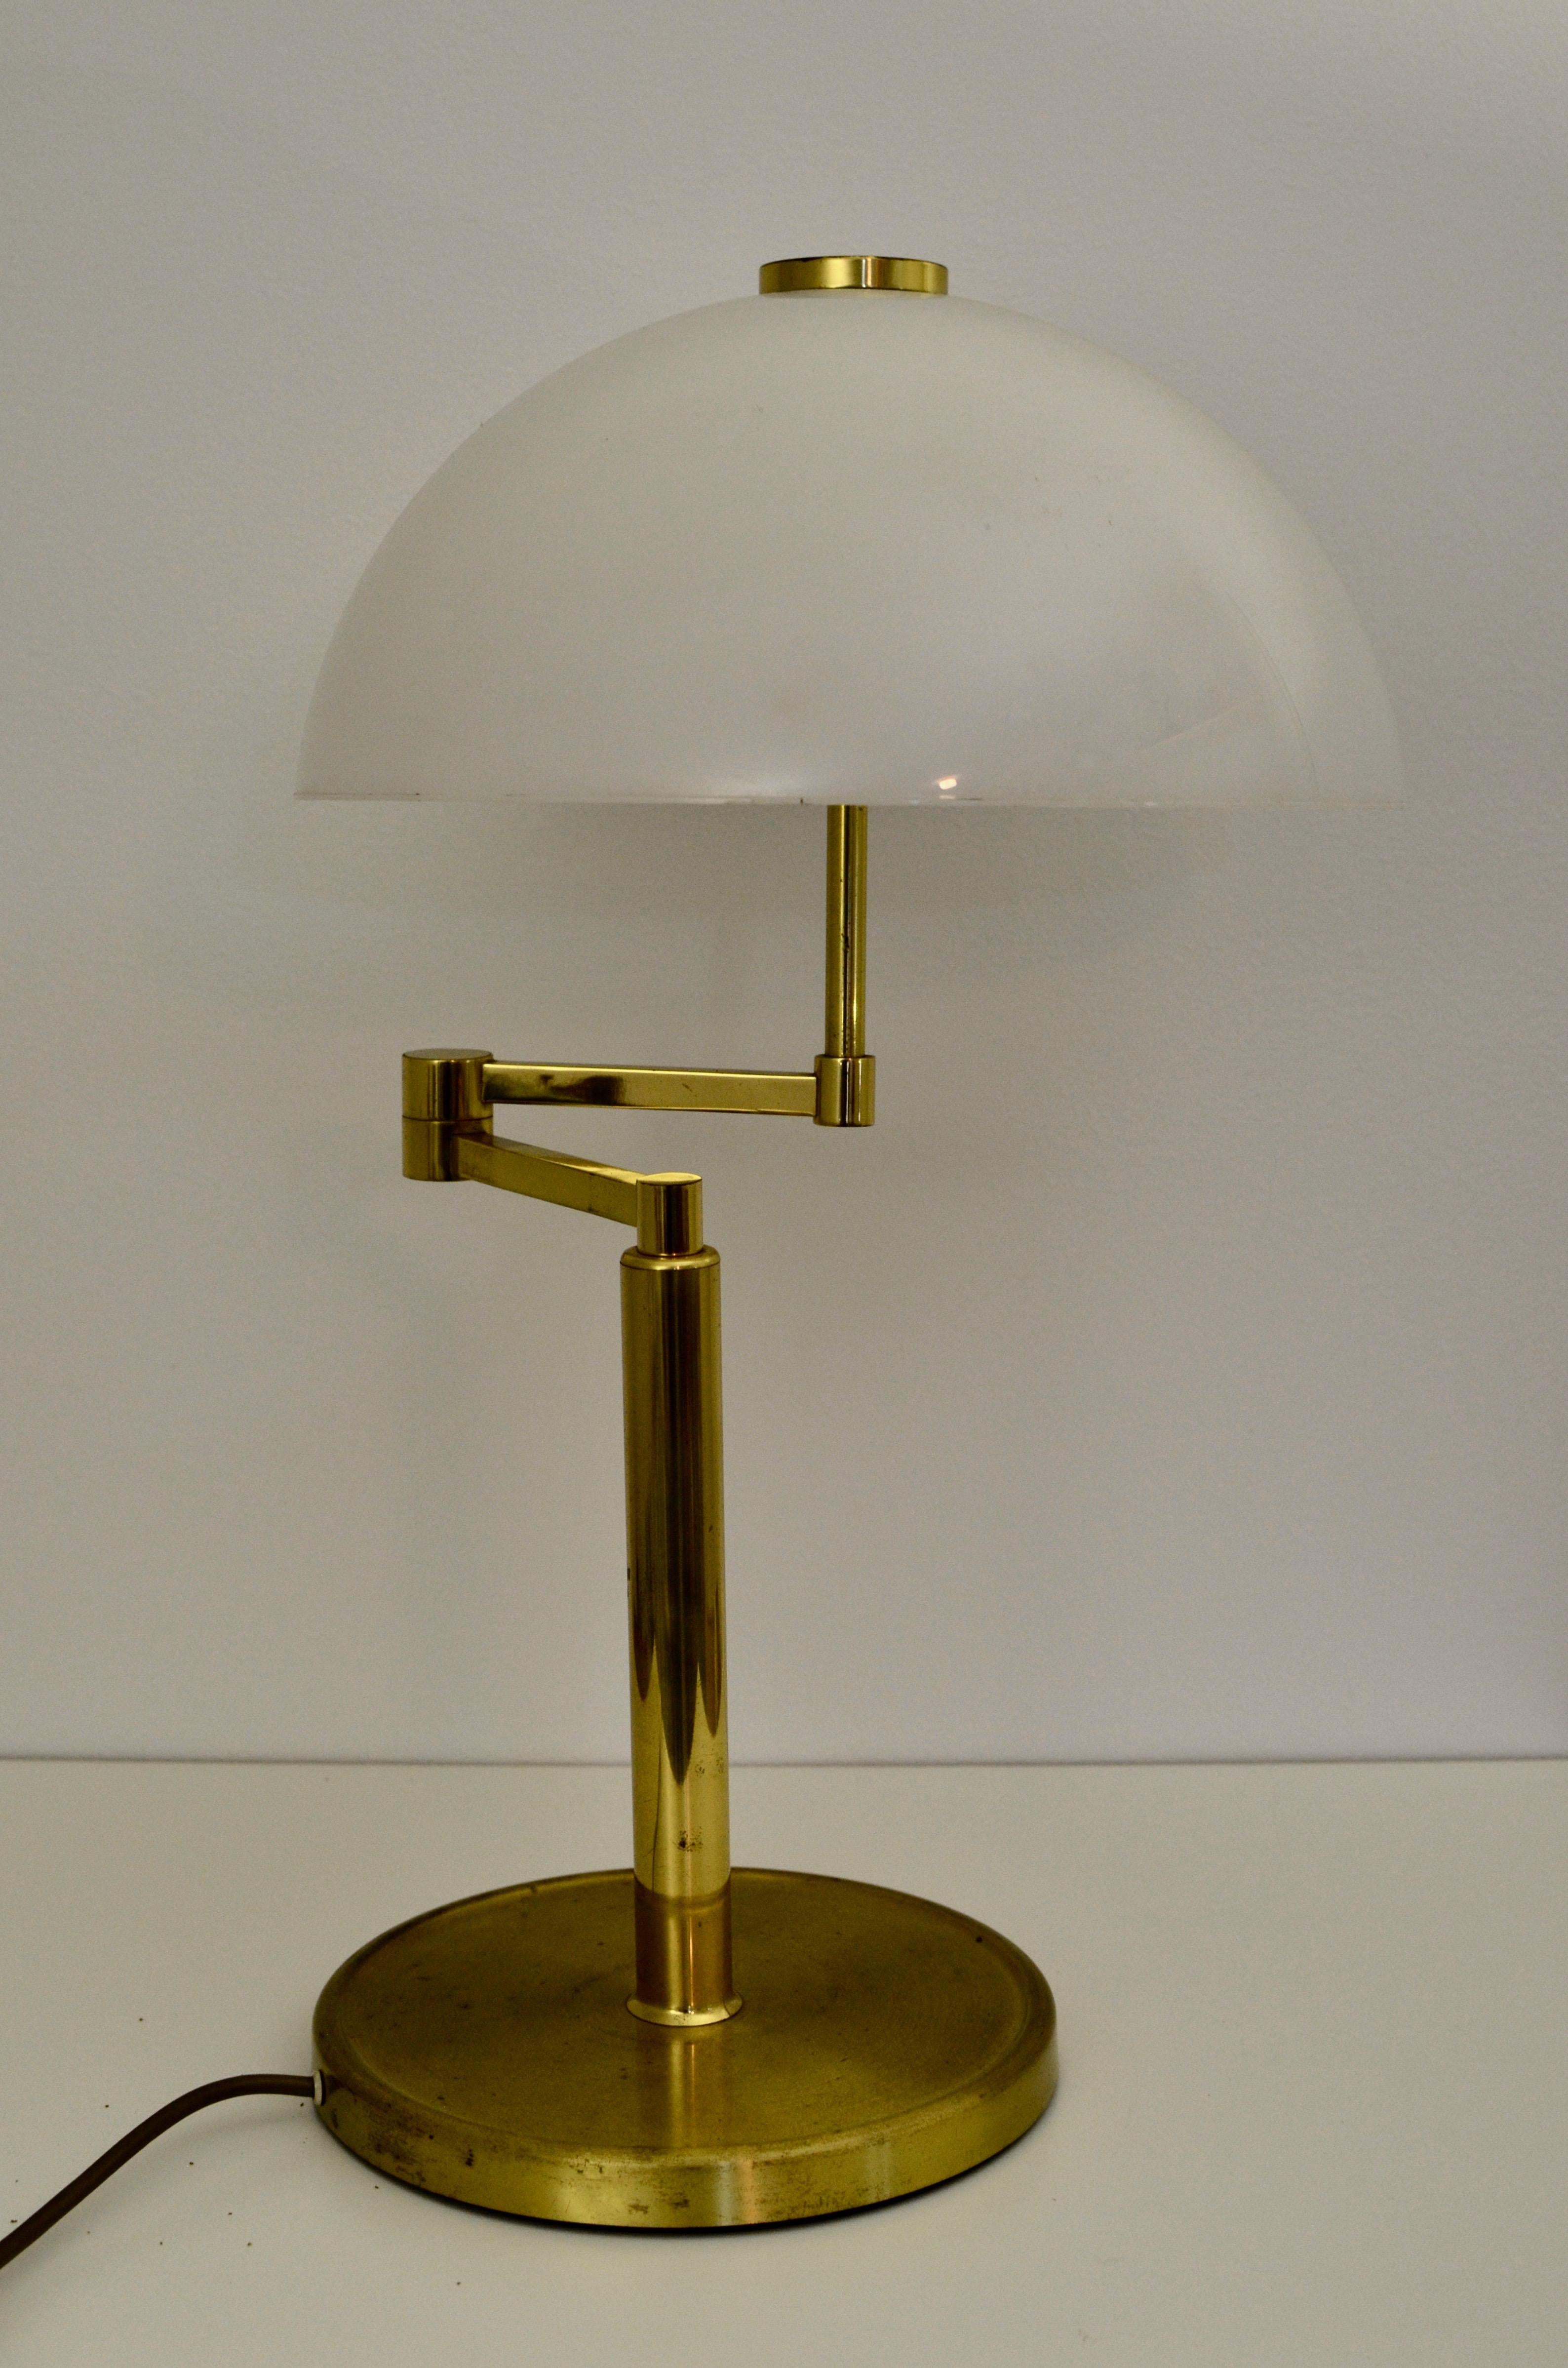 Vintage Table Lamp

Style: Art Deco

Production period: 1950s